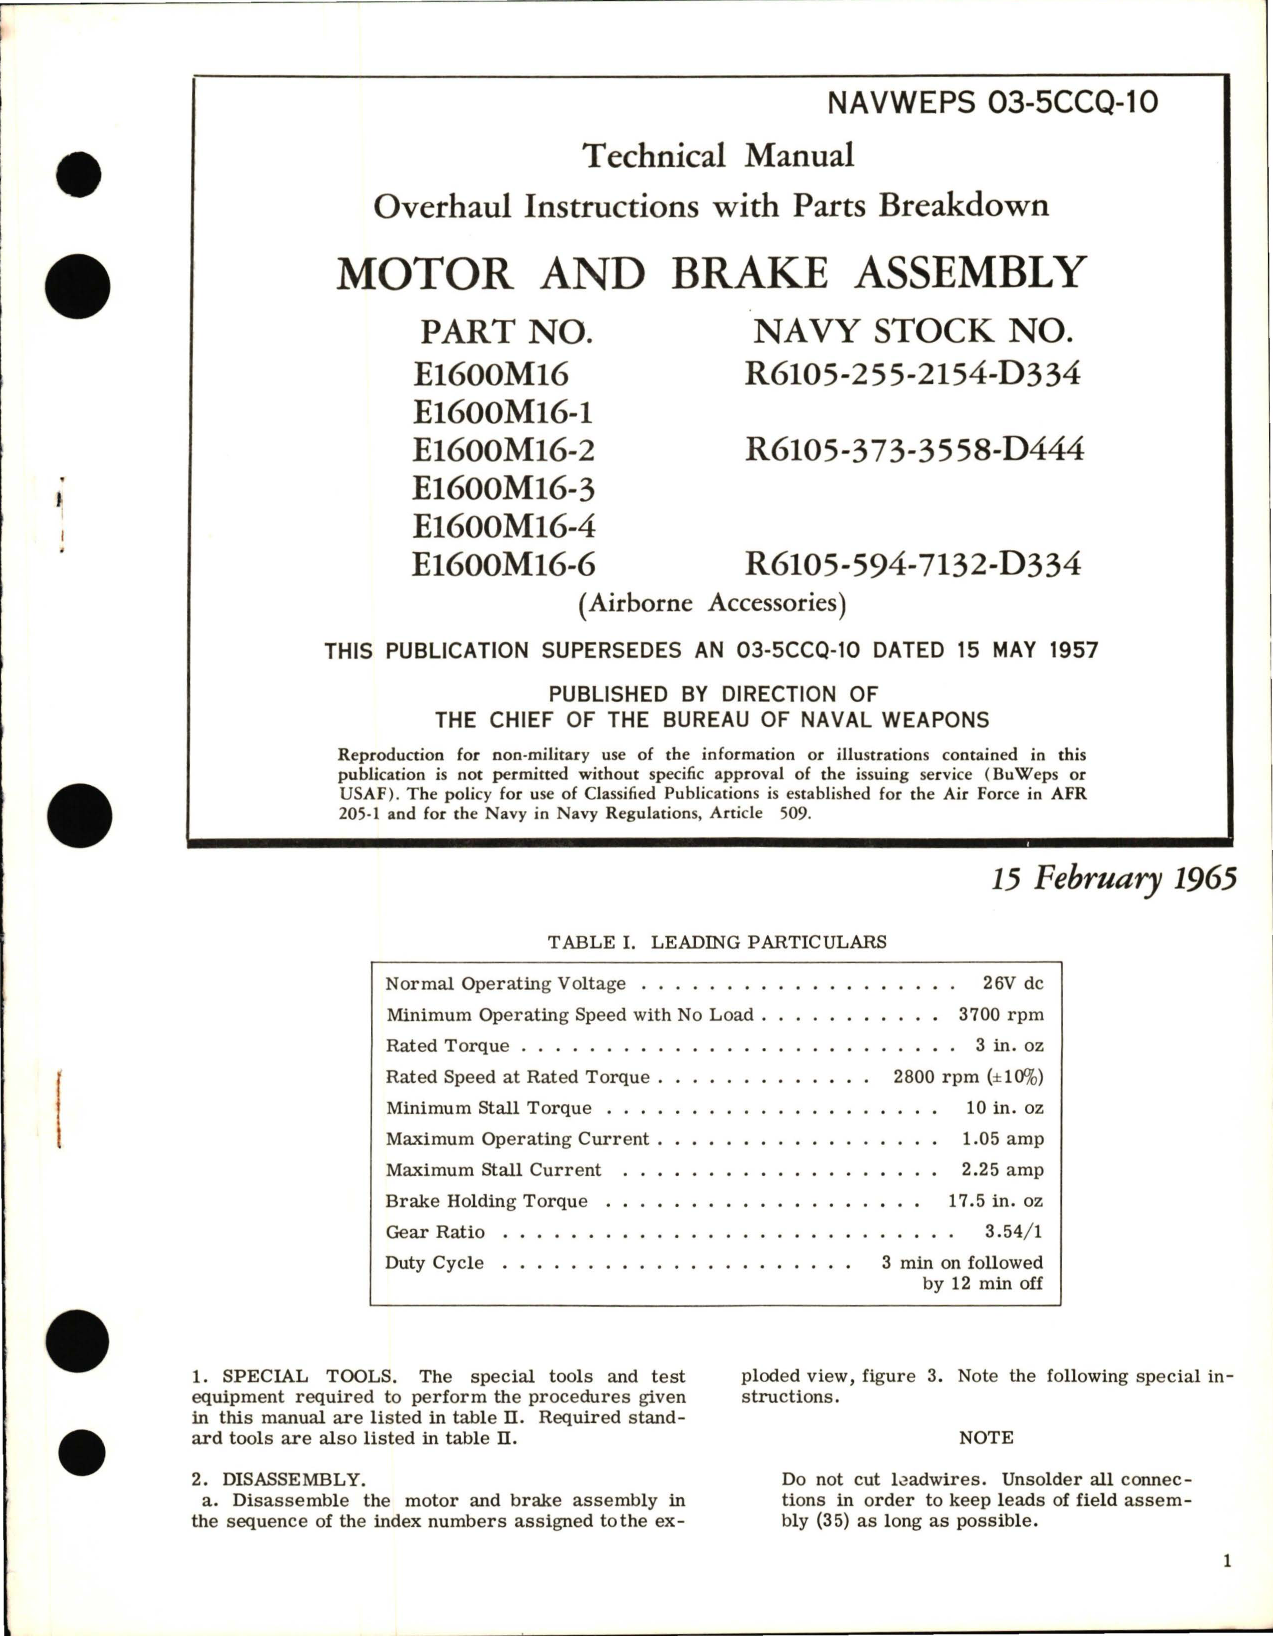 Sample page 1 from AirCorps Library document: Overhaul Instructions with Parts Breakdown for  Motor and Brake Assembly - E1600M16 Series